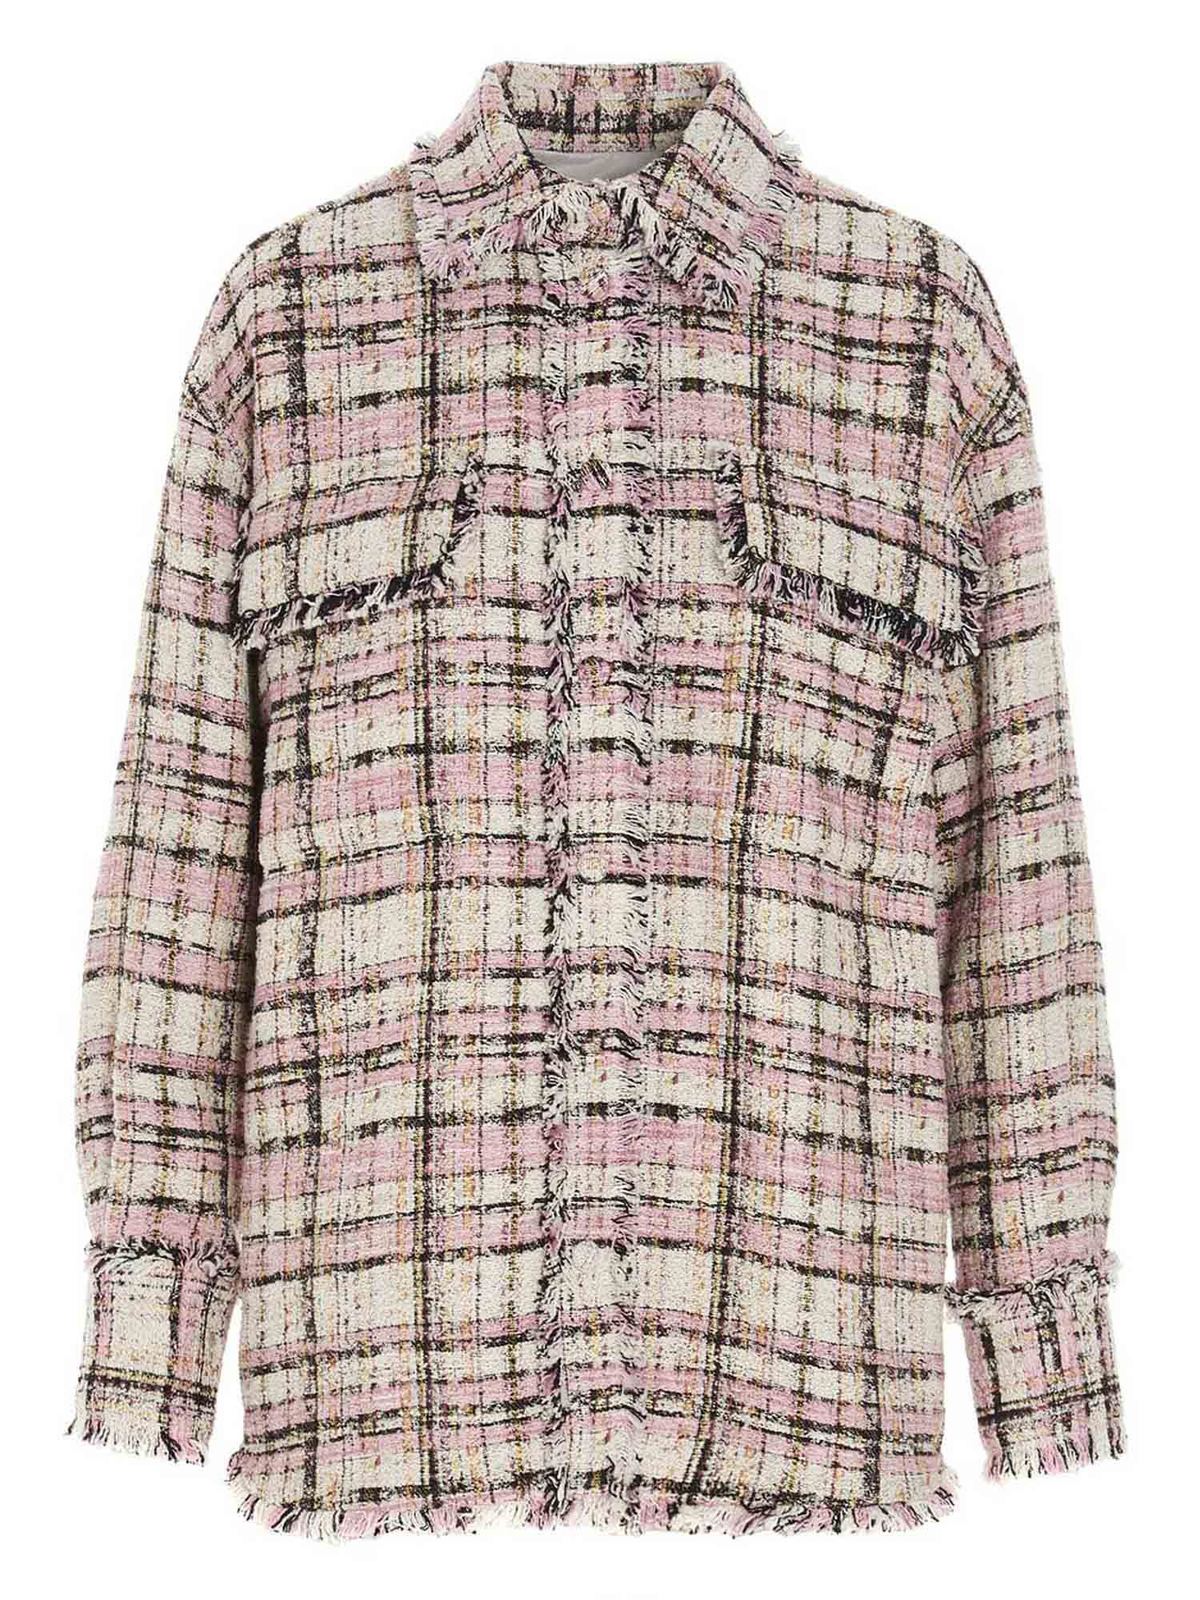 MSGM TWEED OVERSHIRT IN PINK AND CREAM colour